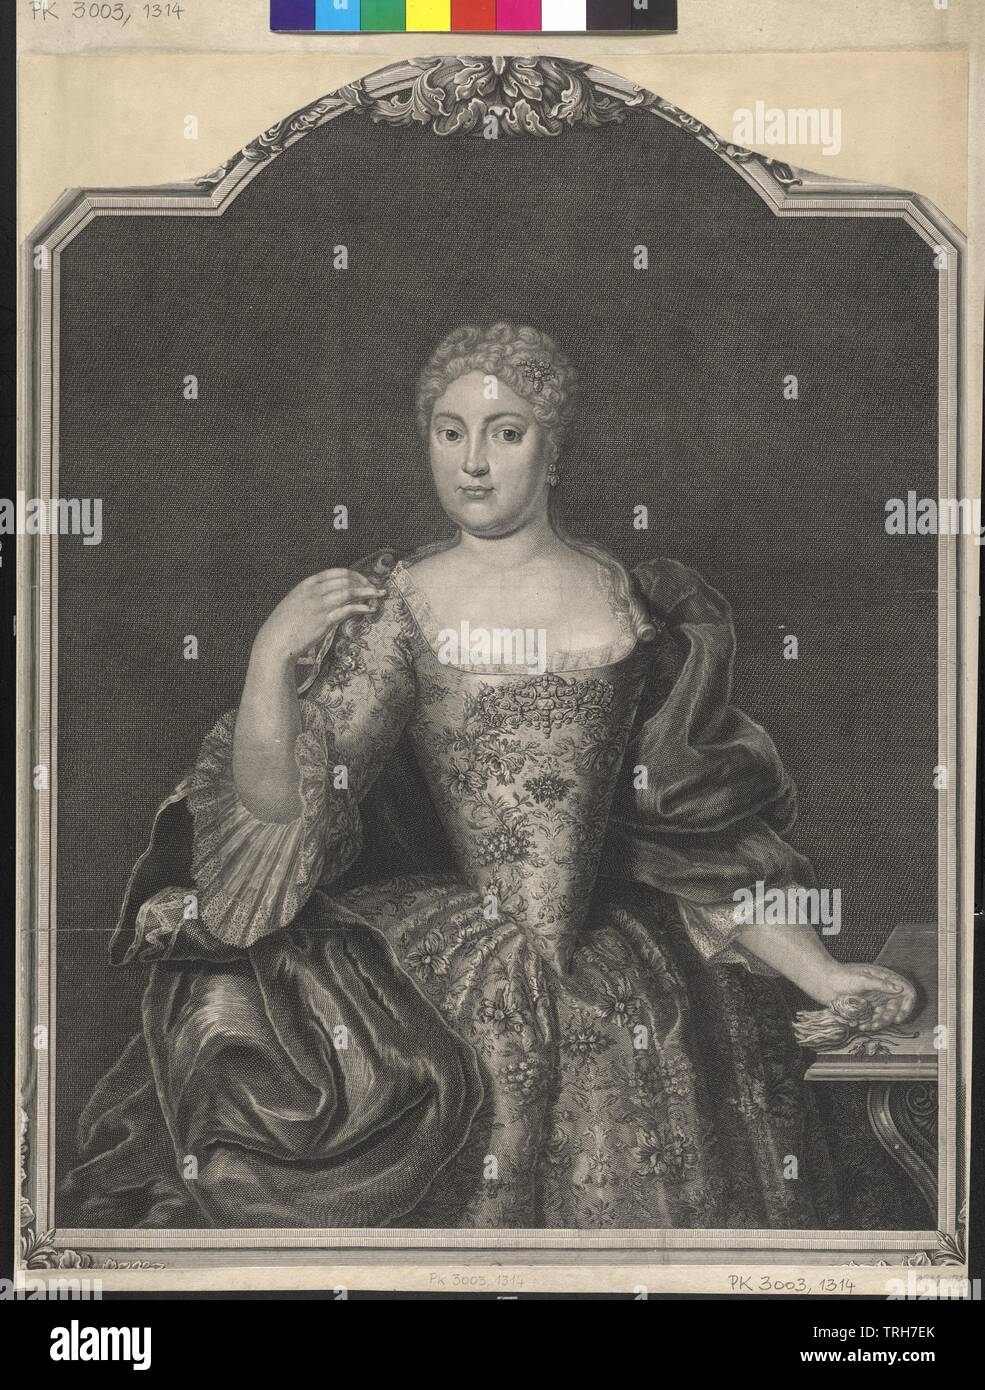 lady circa 1700, copper engraving, cutted, Additional-Rights-Clearance-Info-Not-Available Stock Photo